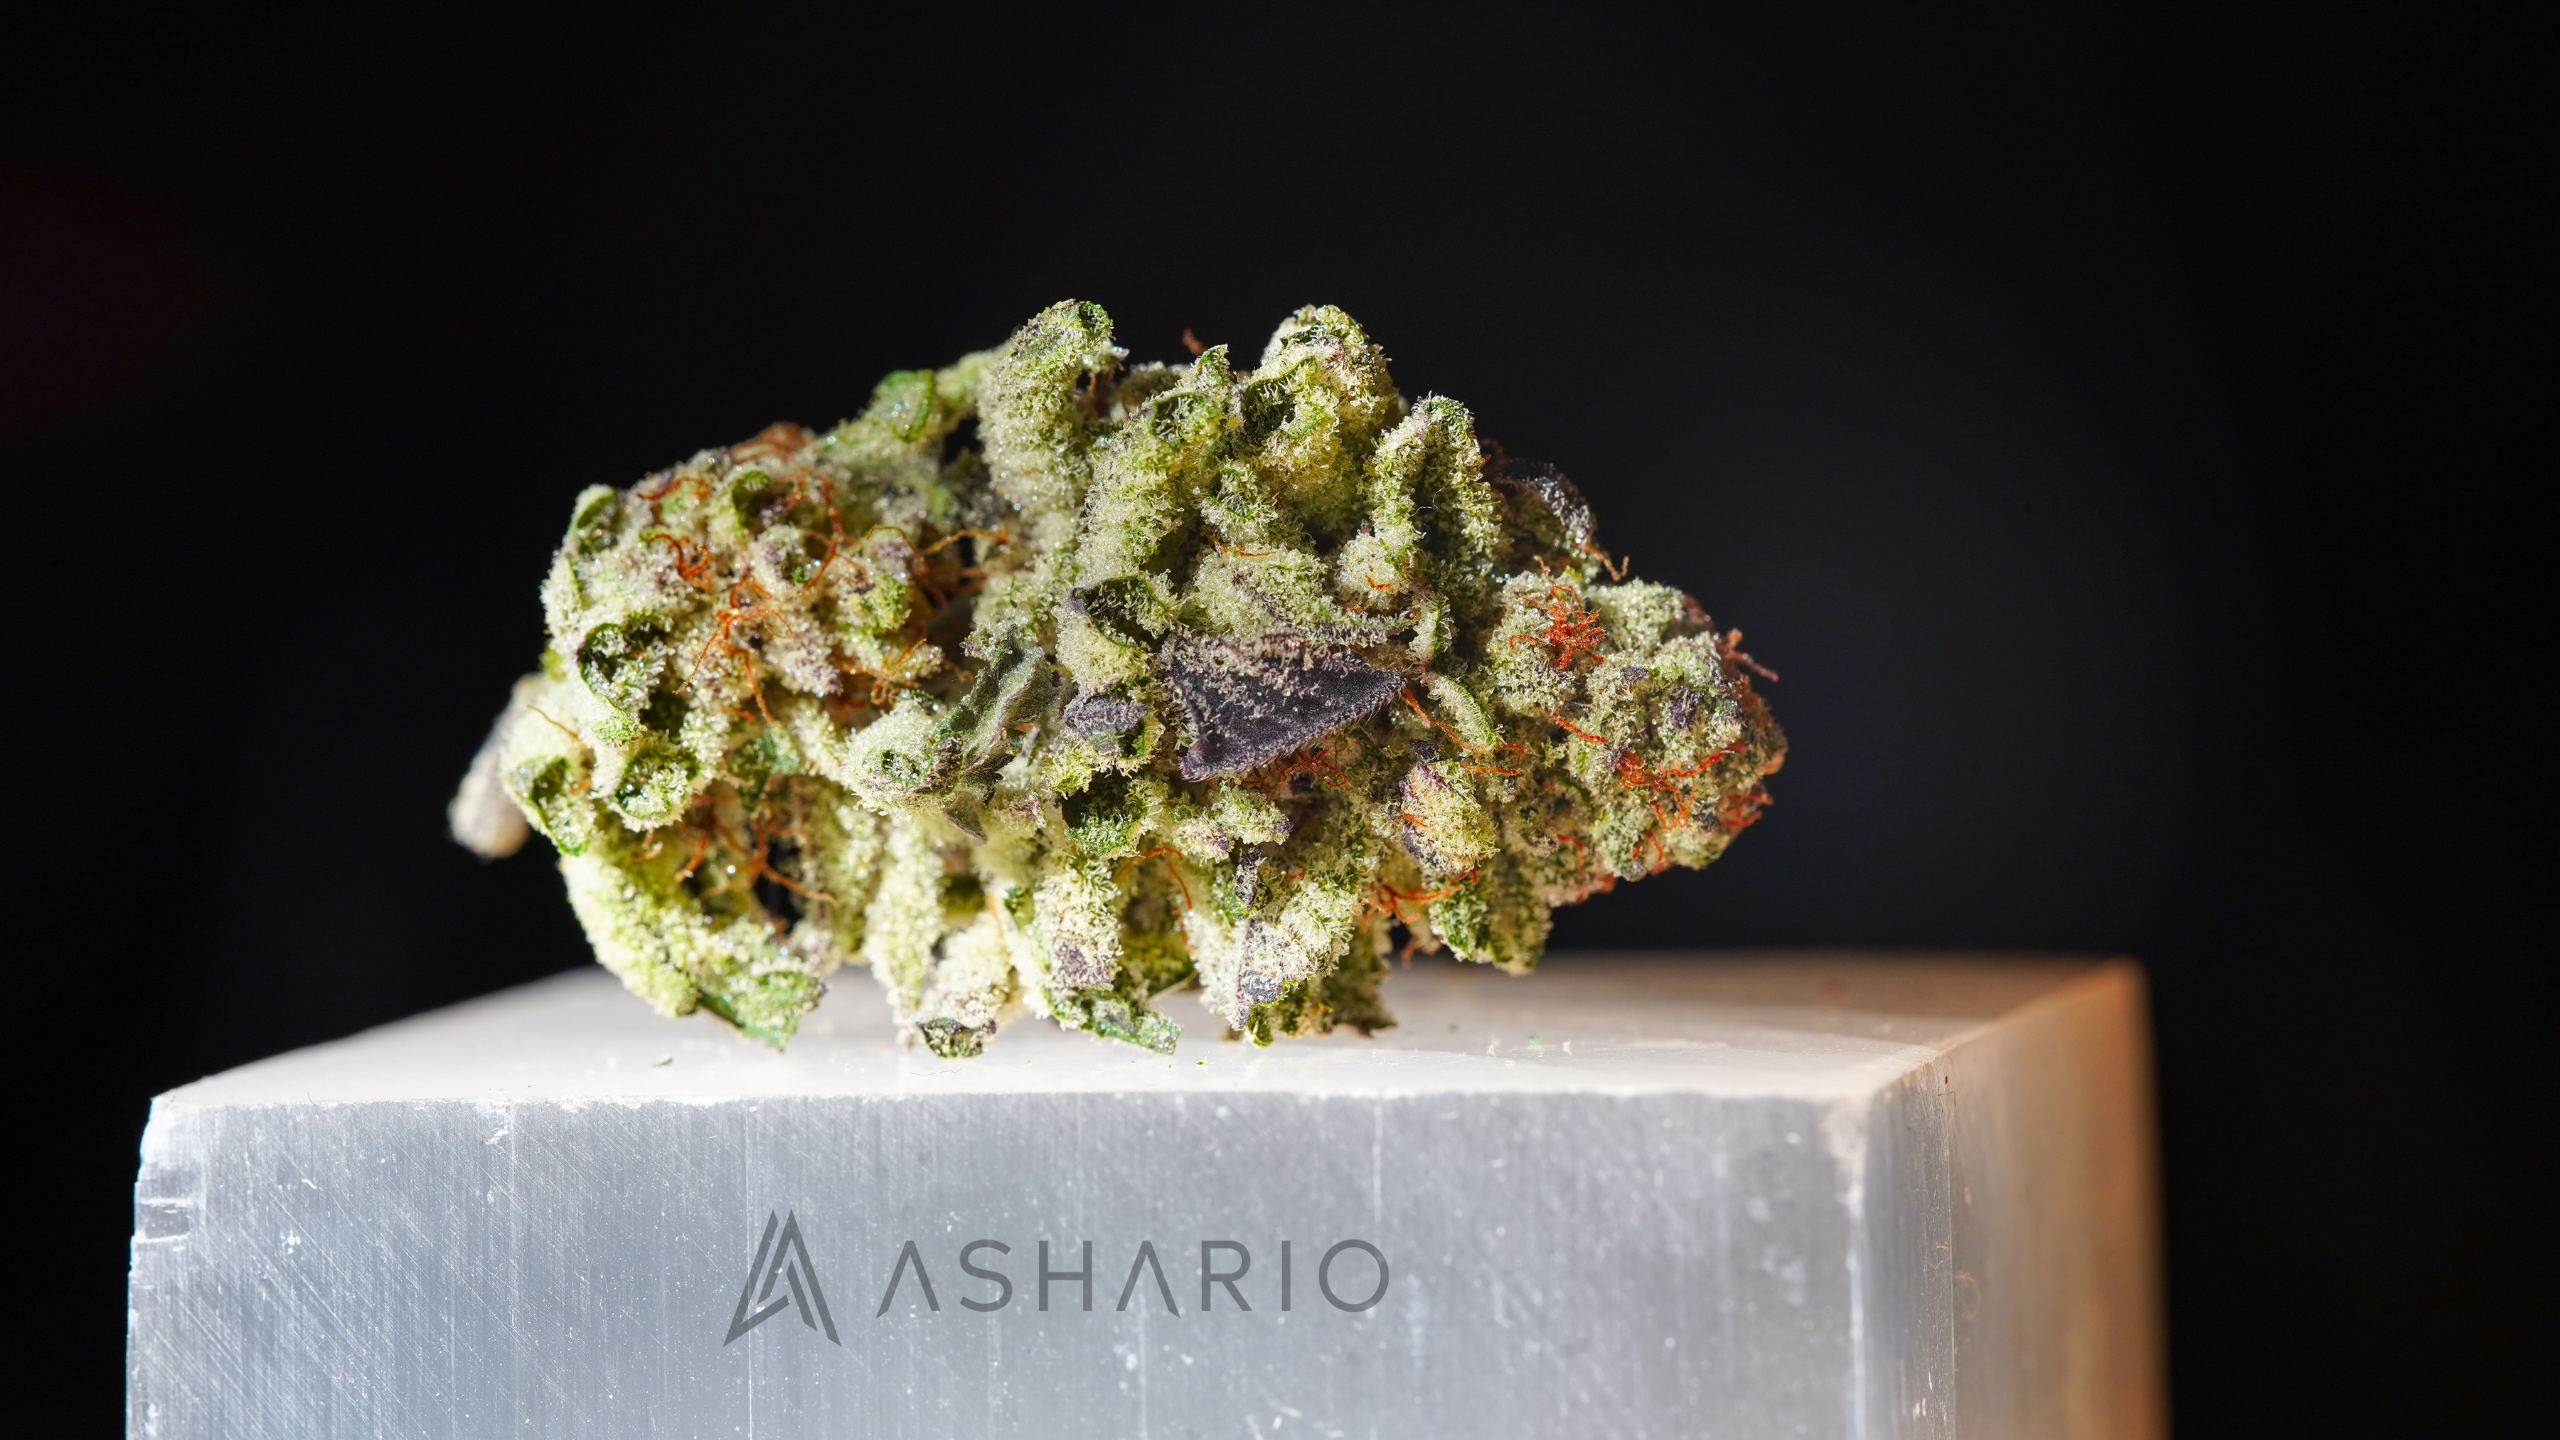 Discover the ideal weed shop experience at Ashario, where quality, selection, and community converge. Explore premium cannabis products, knowledgeable staff, and a welcoming atmosphere across three convenient locations.